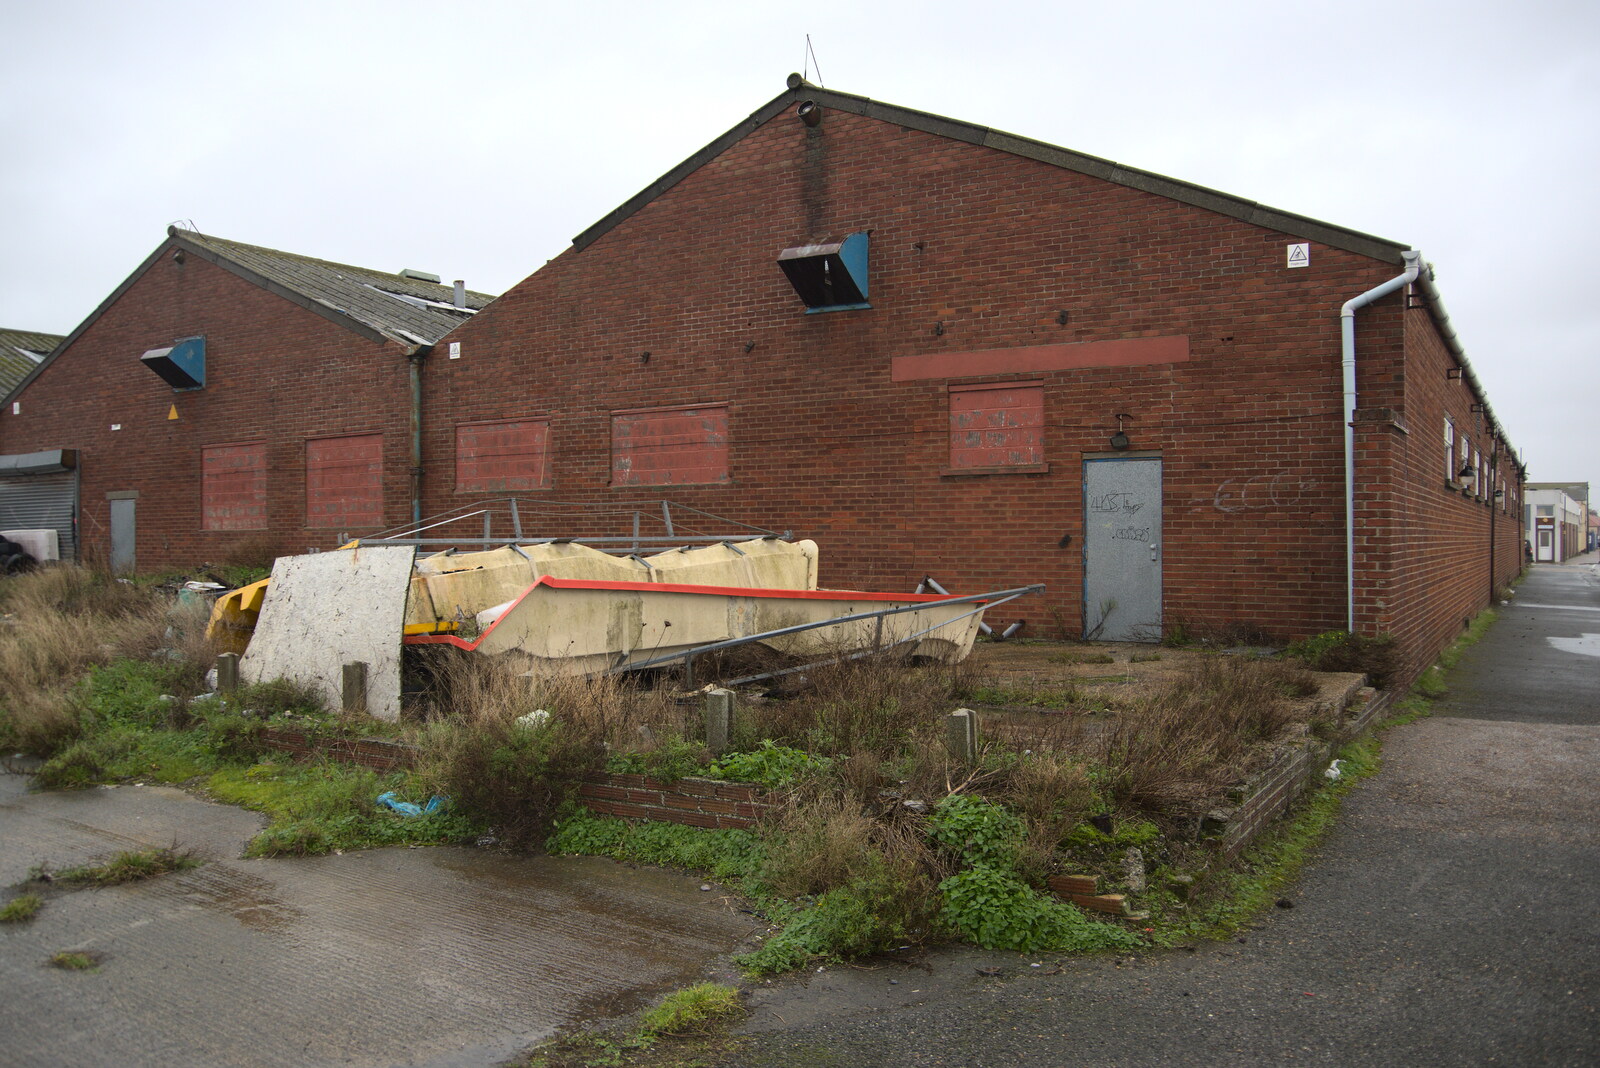 More Yarmouth dereliction from The Hippodrome Christmas Spectacular, Great Yarmouth, Norfolk - 29th December 2022